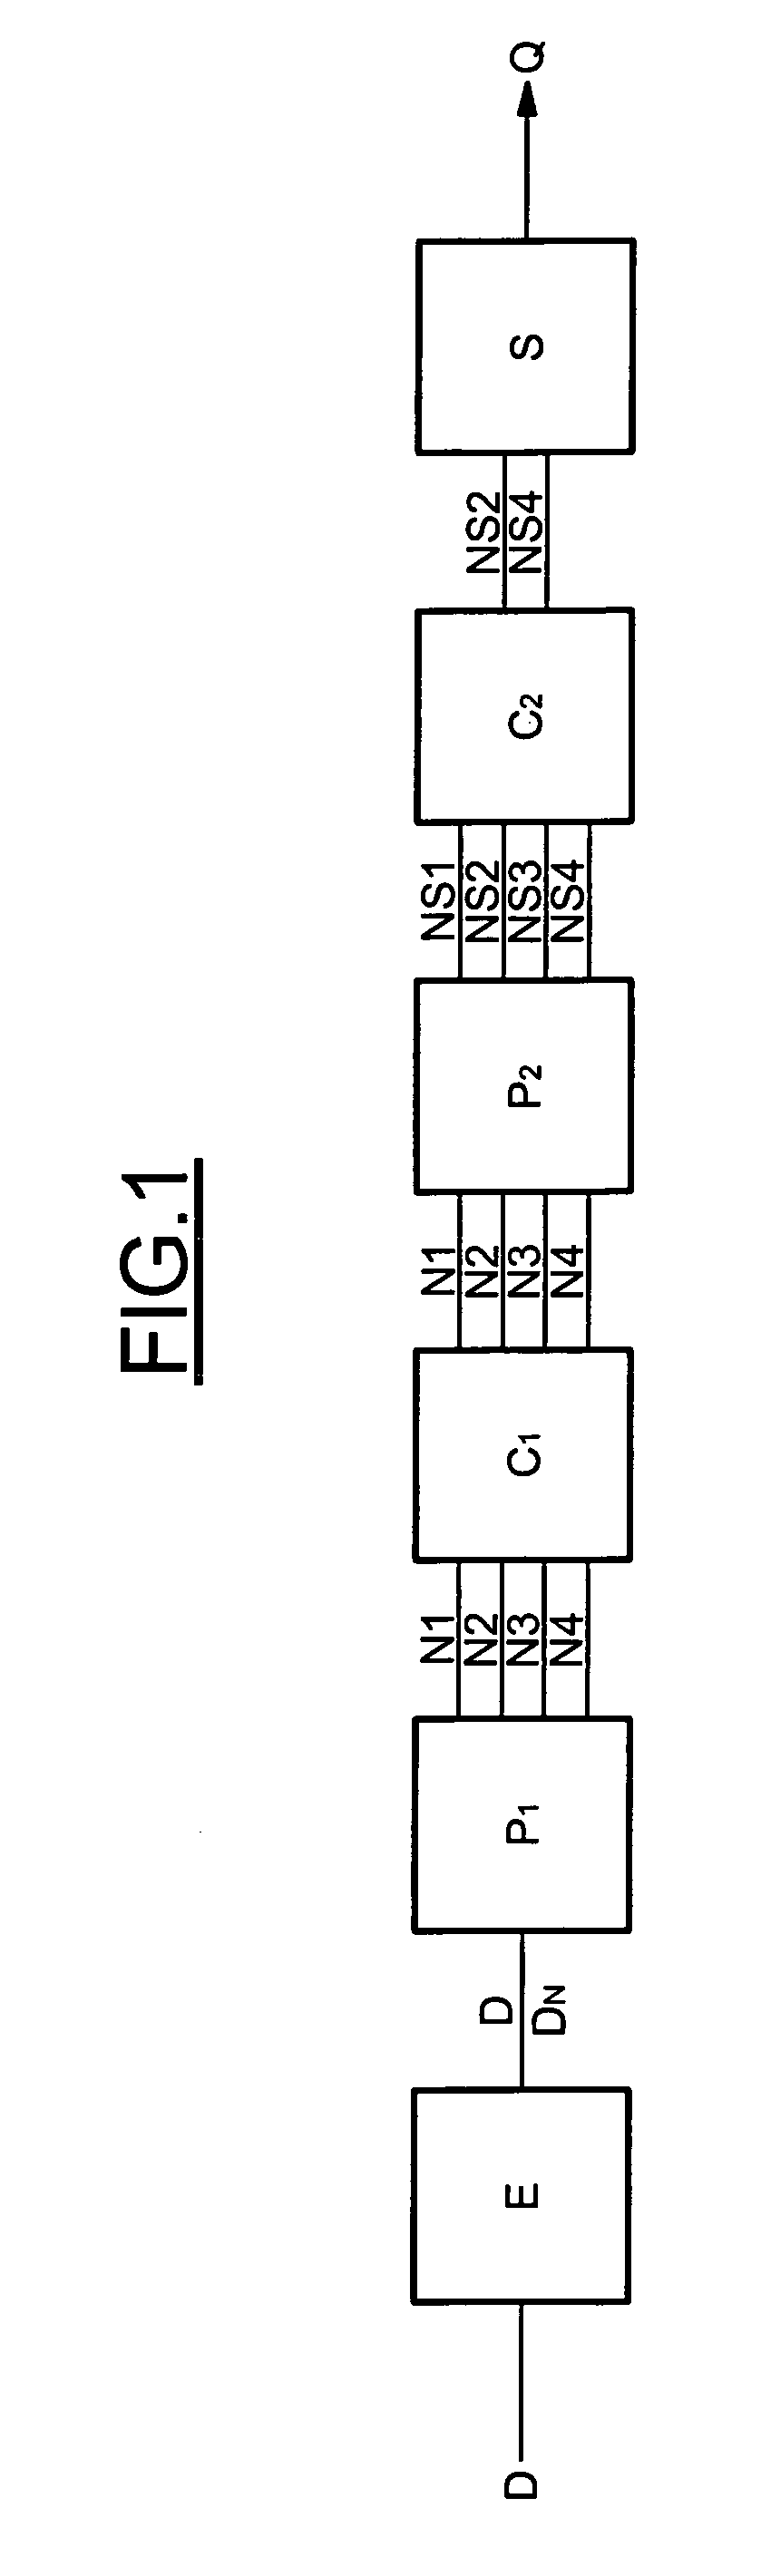 Multivibrator protected against current or voltage spikes